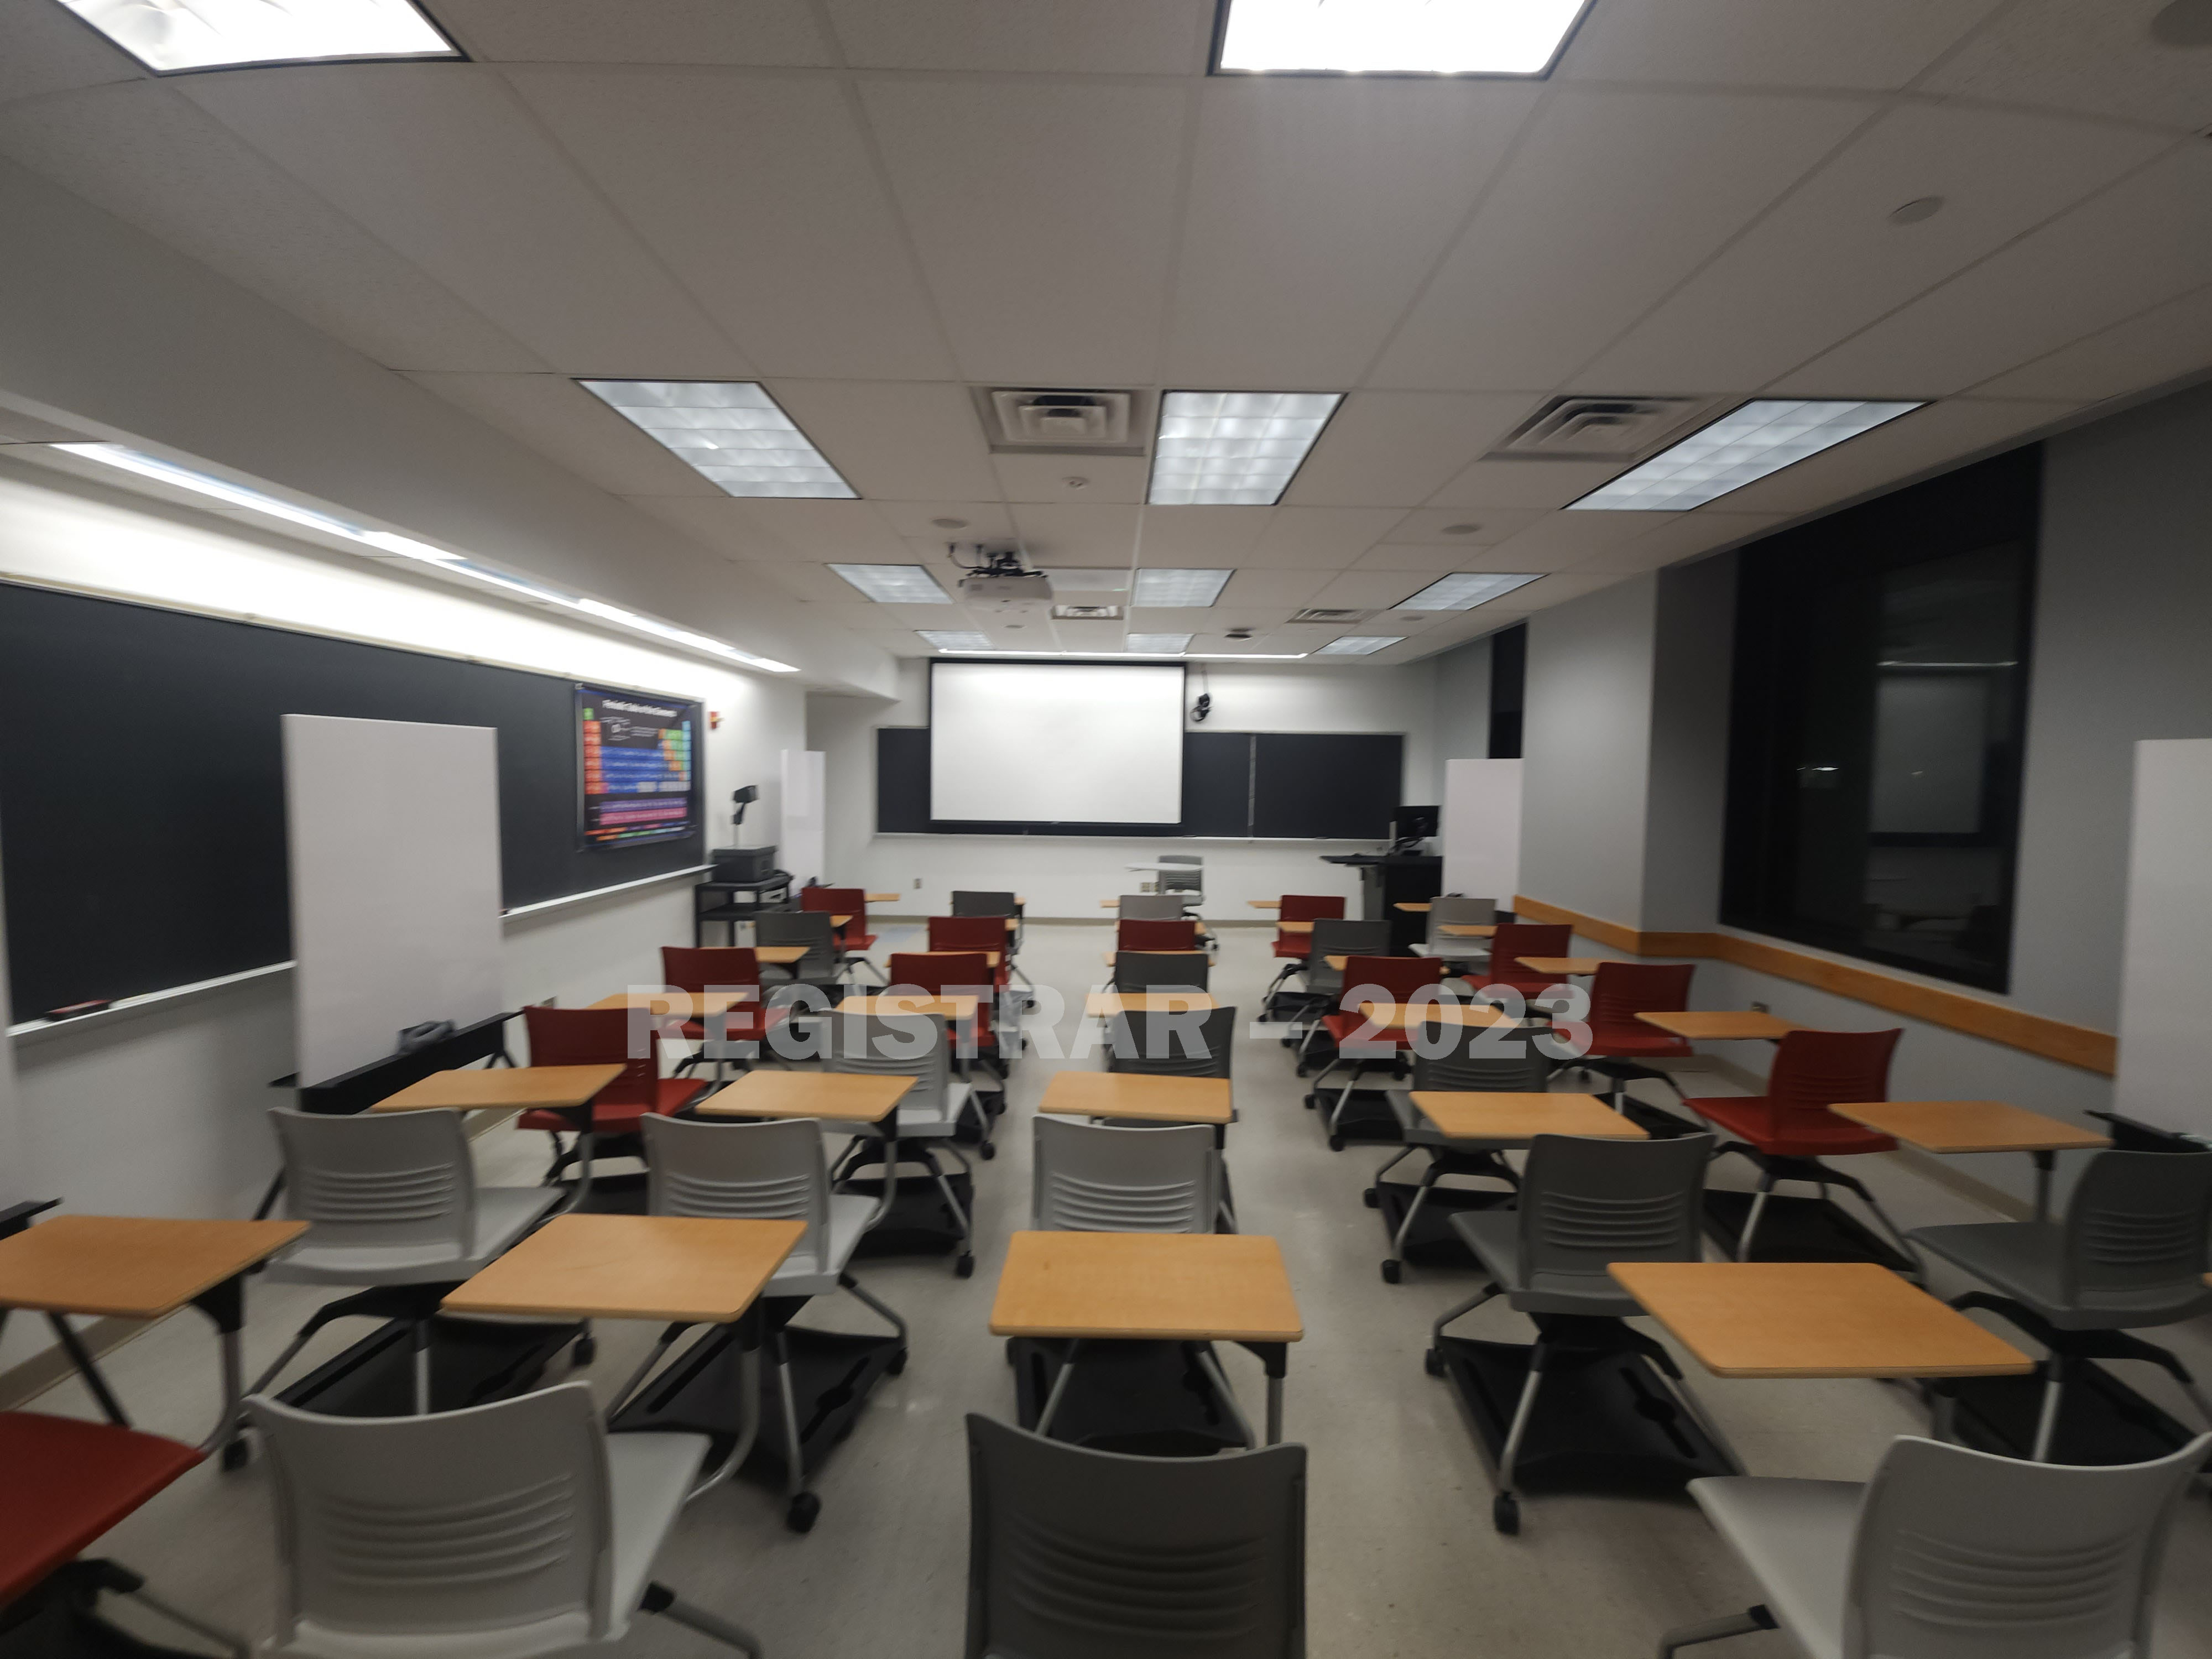 McPherson Chemical Lab room 1040 ultra wide view from the back of the room with projection screen down